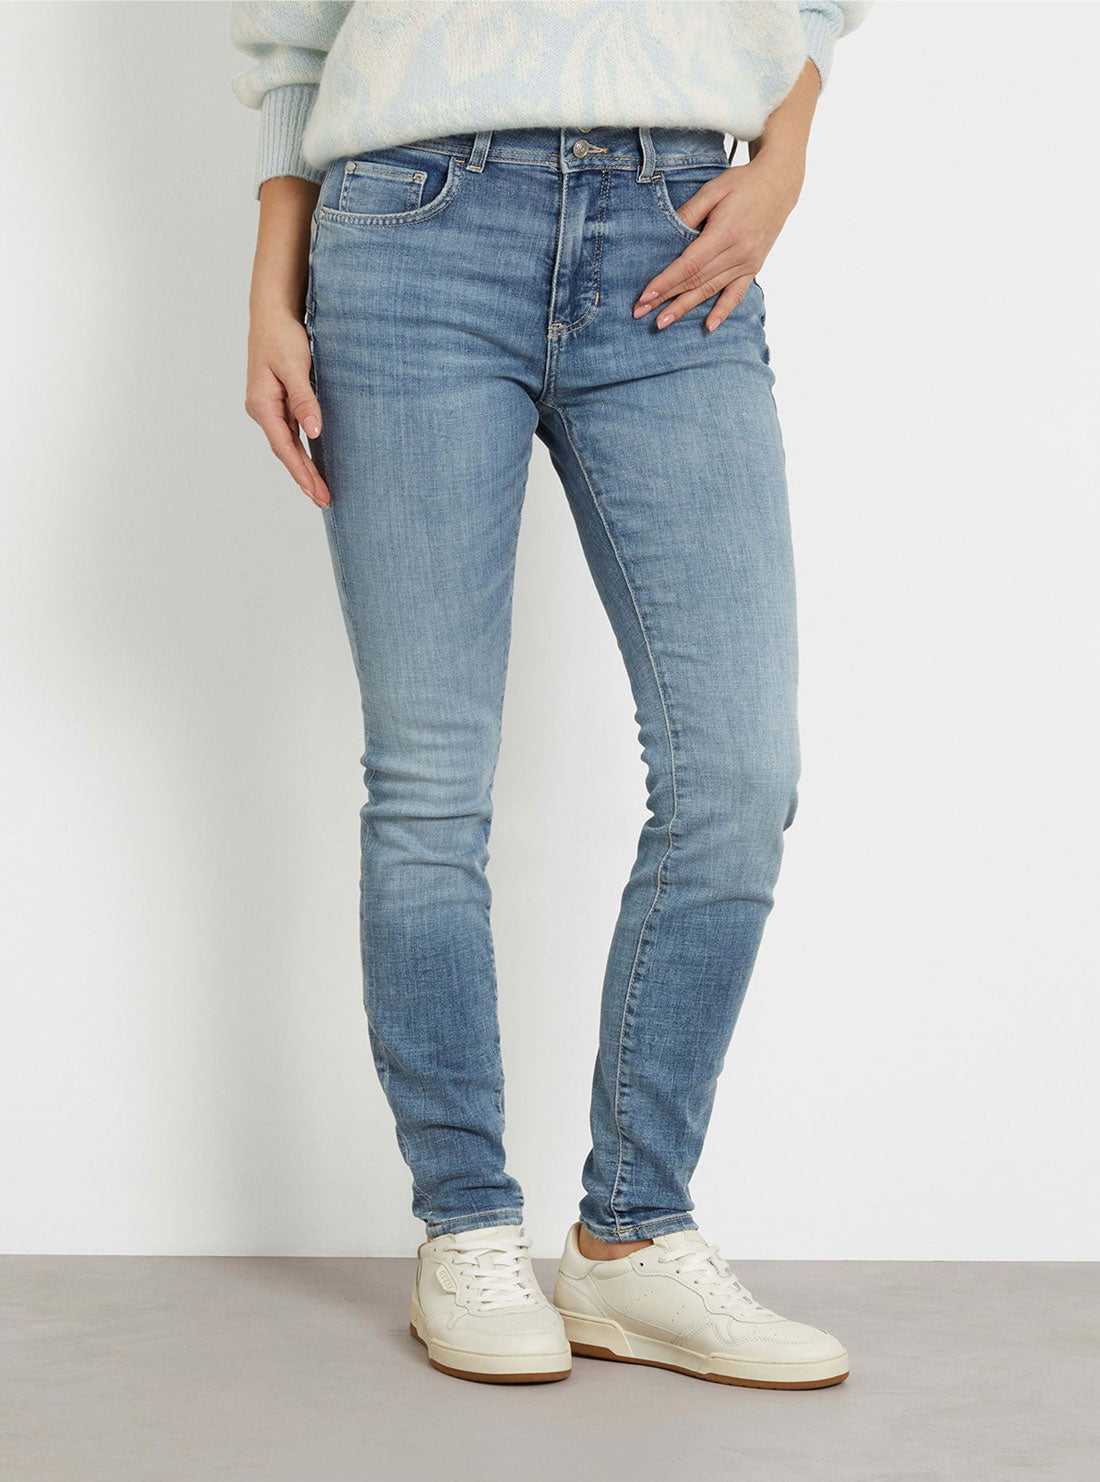 GUESS Mid-Rise Skinny Leg Shape Up in Mid Wash front view